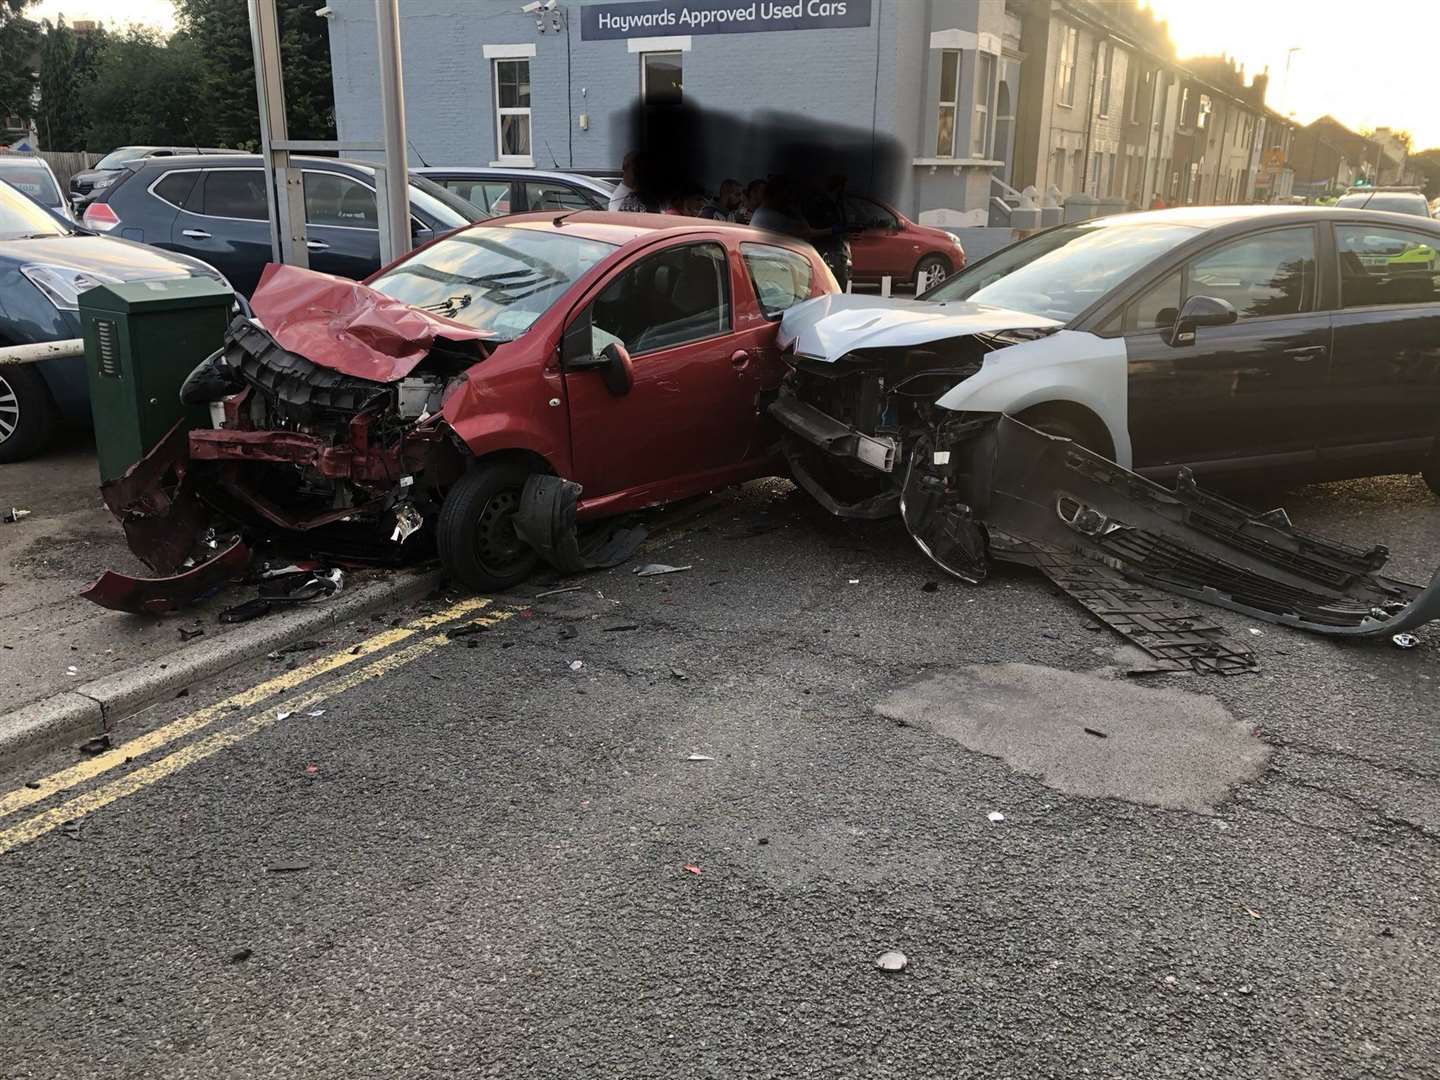 The scene of the crash on Luton Road, Chatham Picture: @KentSpecials